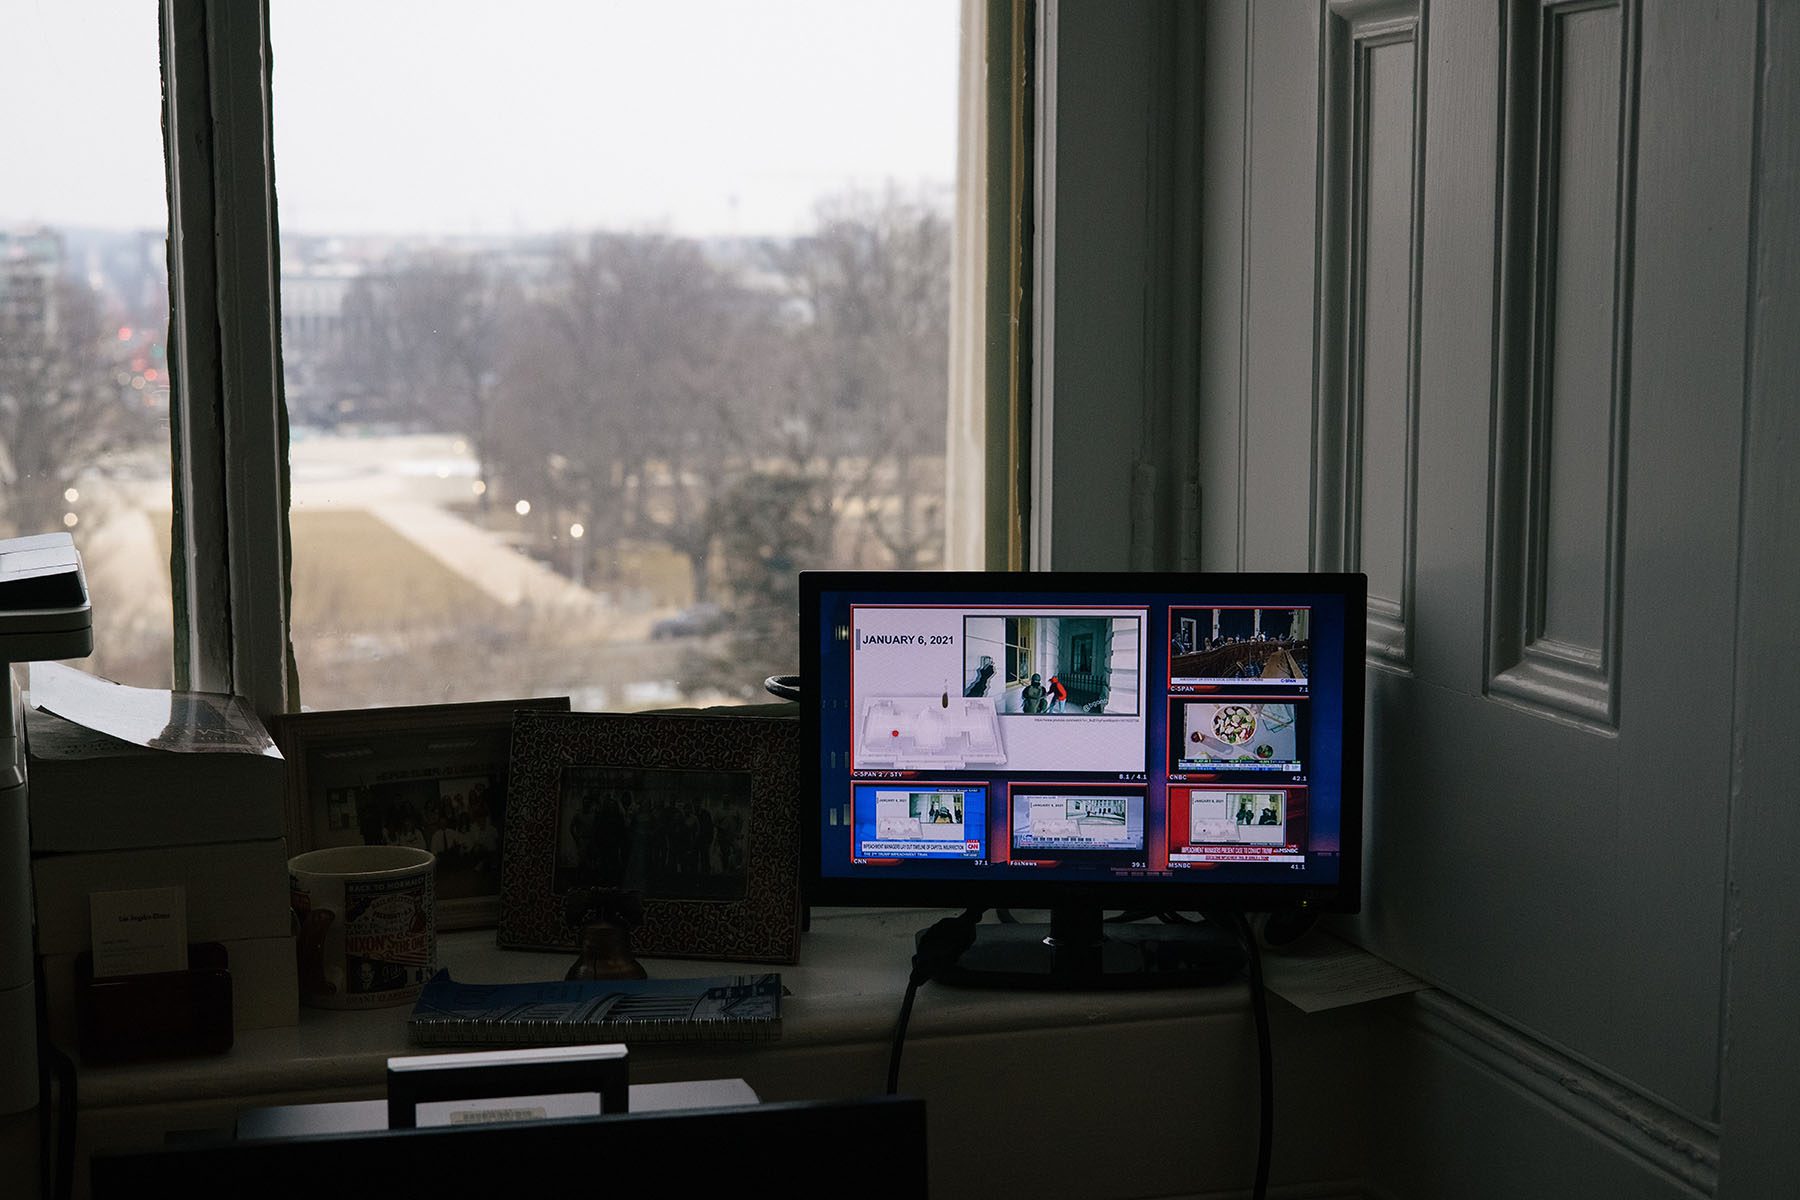 Video of the January 6th attack plays on a small screen in a press gallery.